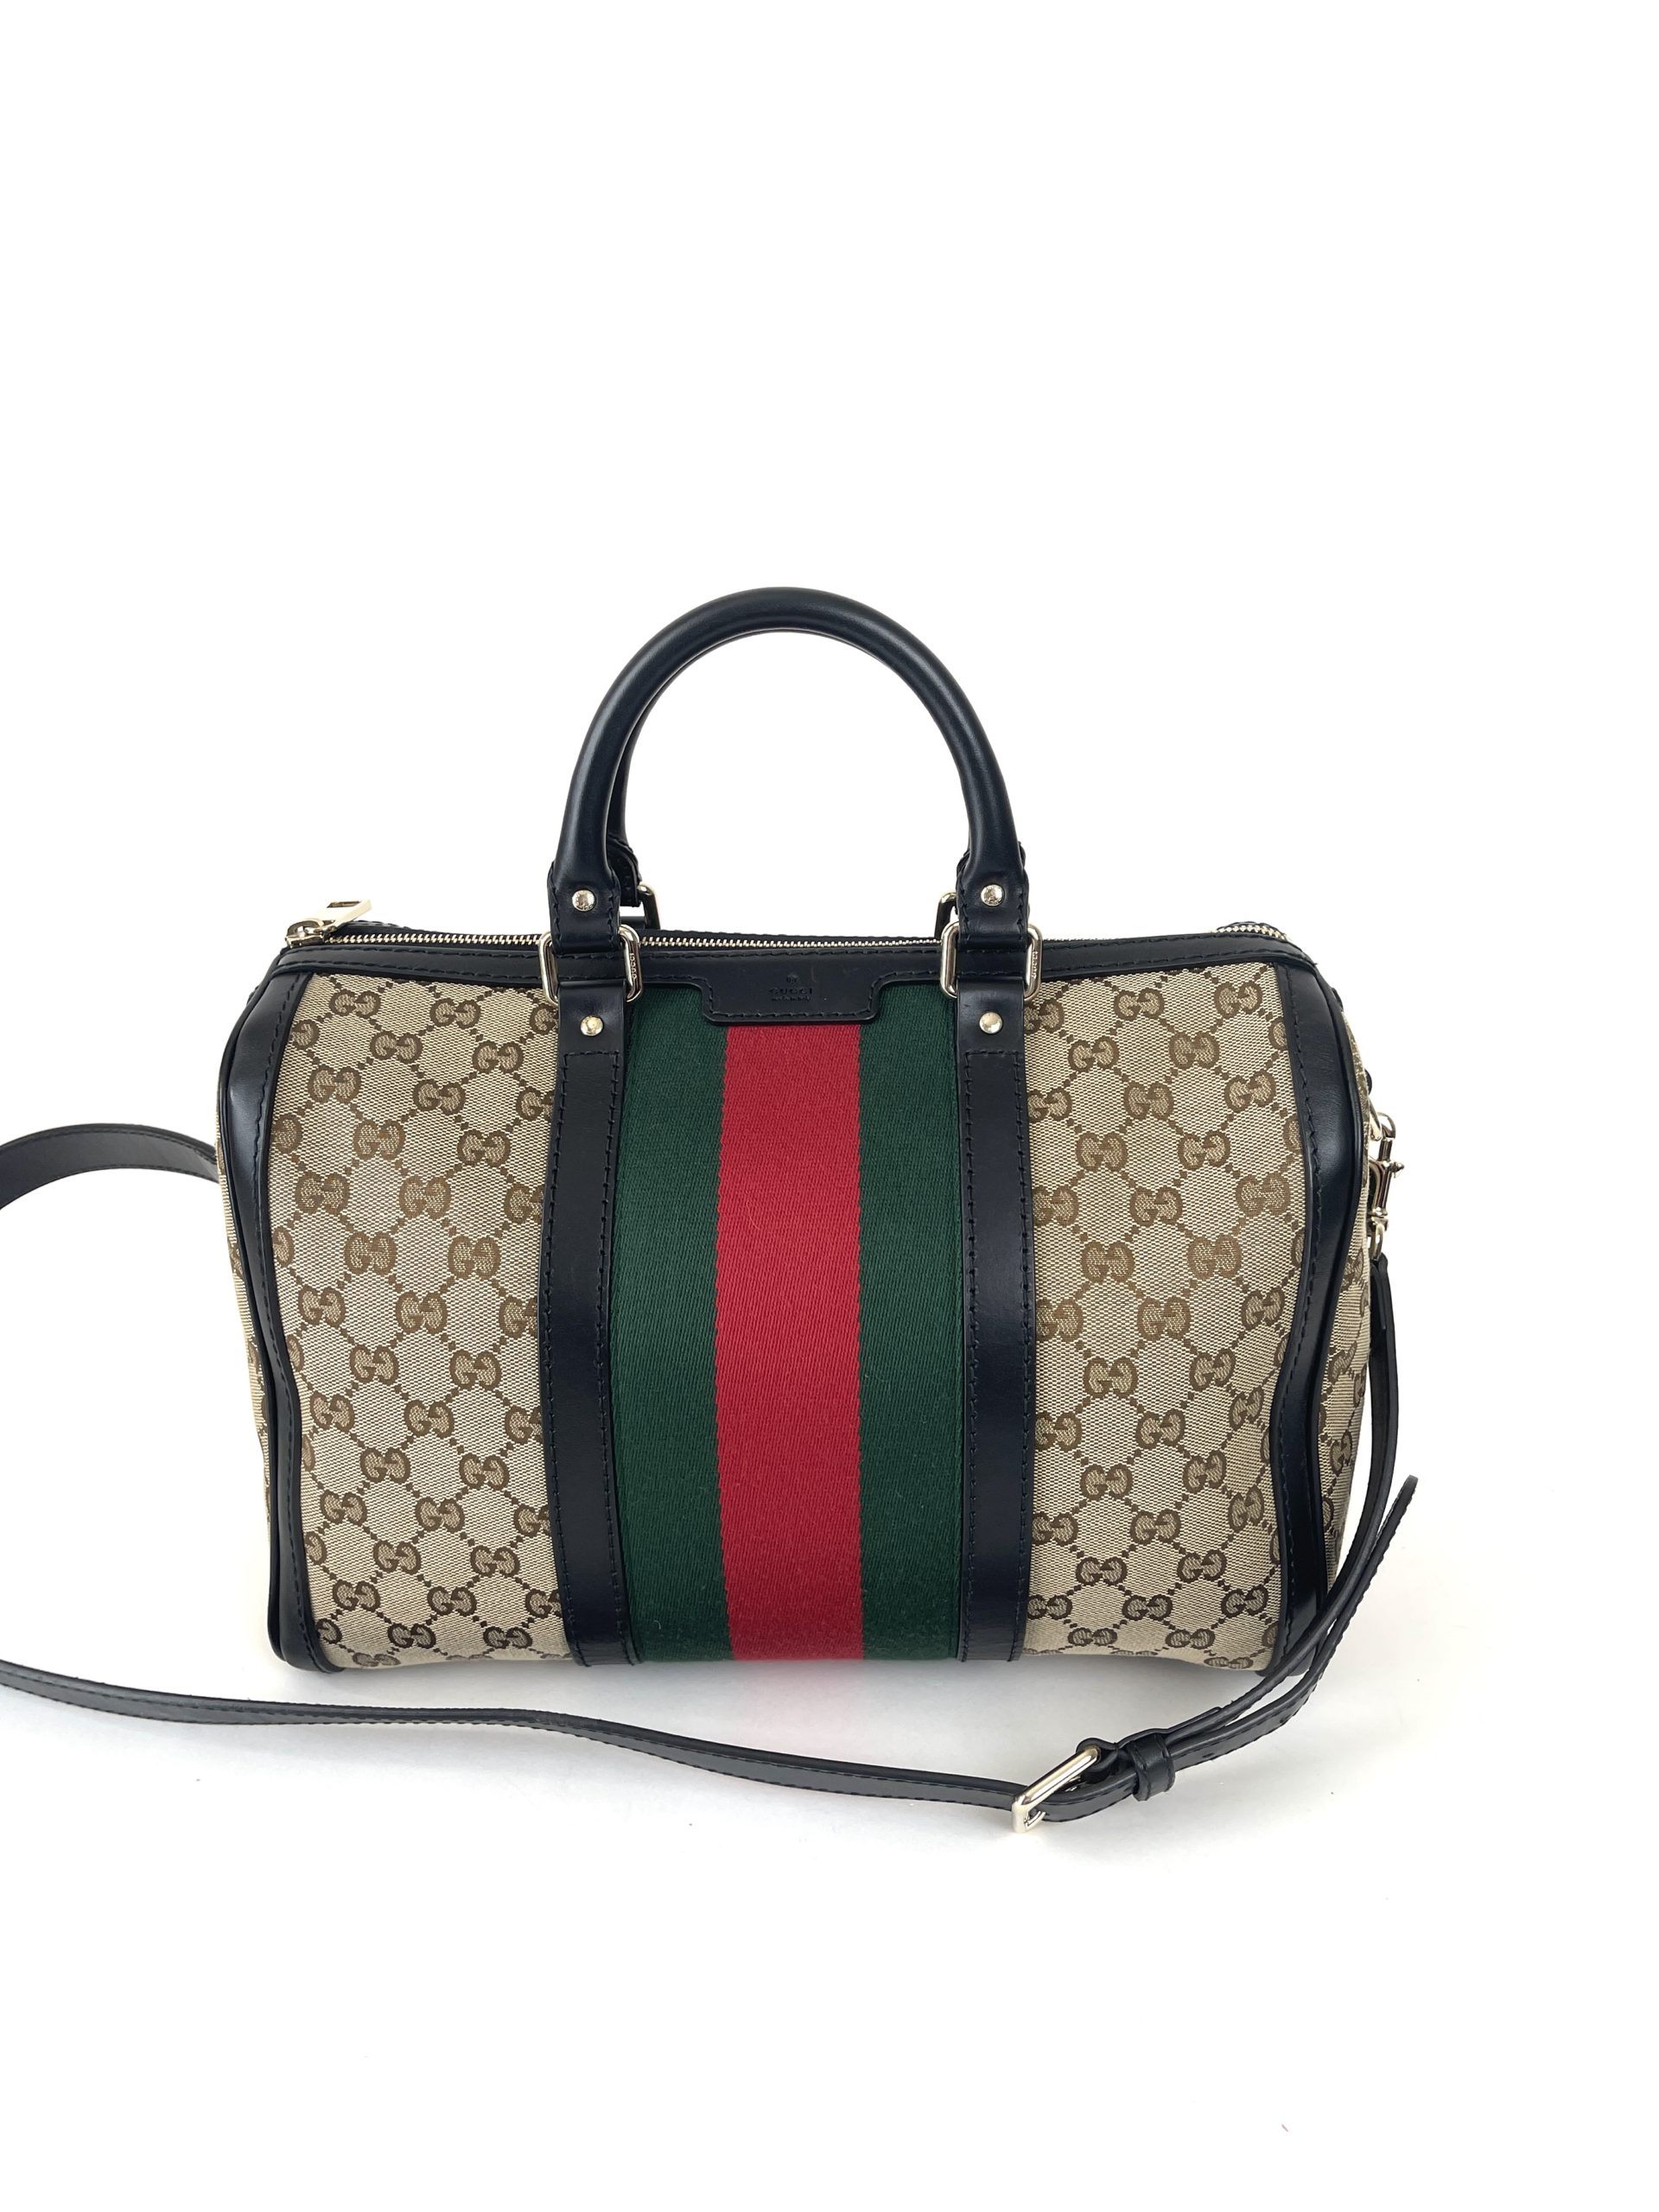 Gucci, Bags, Gucci Backpack Logo Medium Sized Red Green Striped Brown Bag